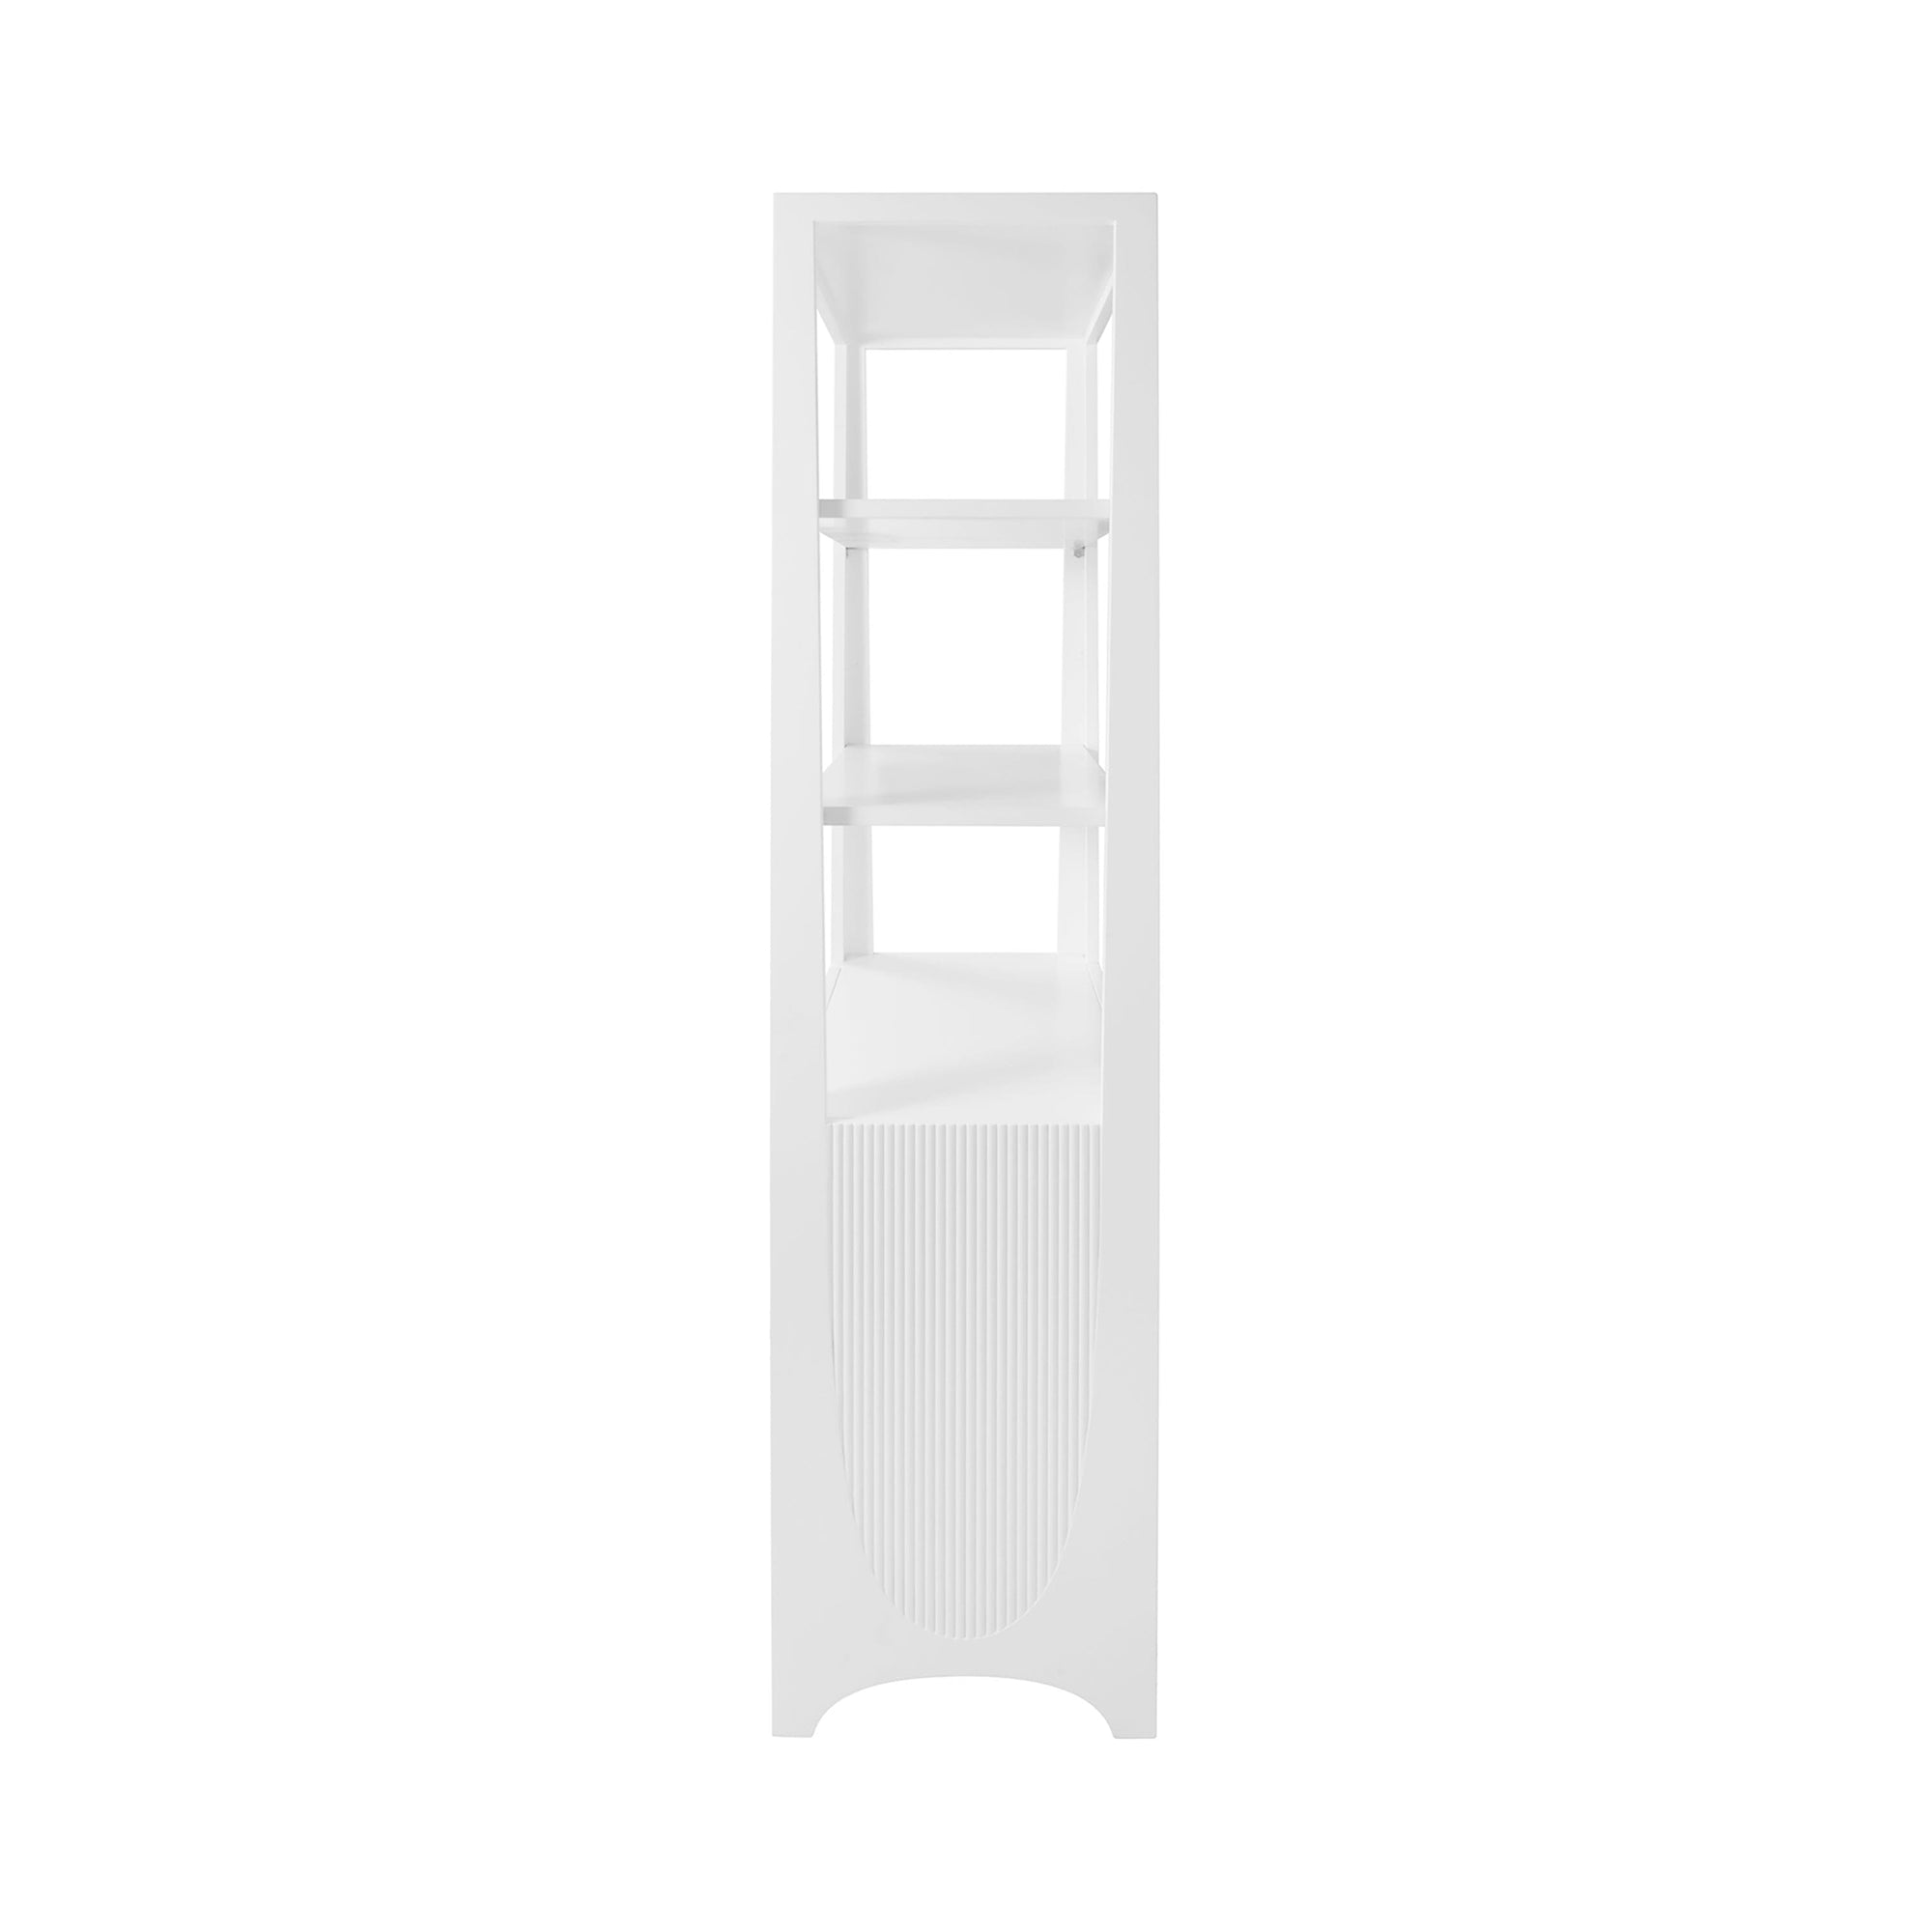 Angle View - Young White Lacquer Etagere | Worlds Away Matte Finish Book Shelf - Fig Linens and Home